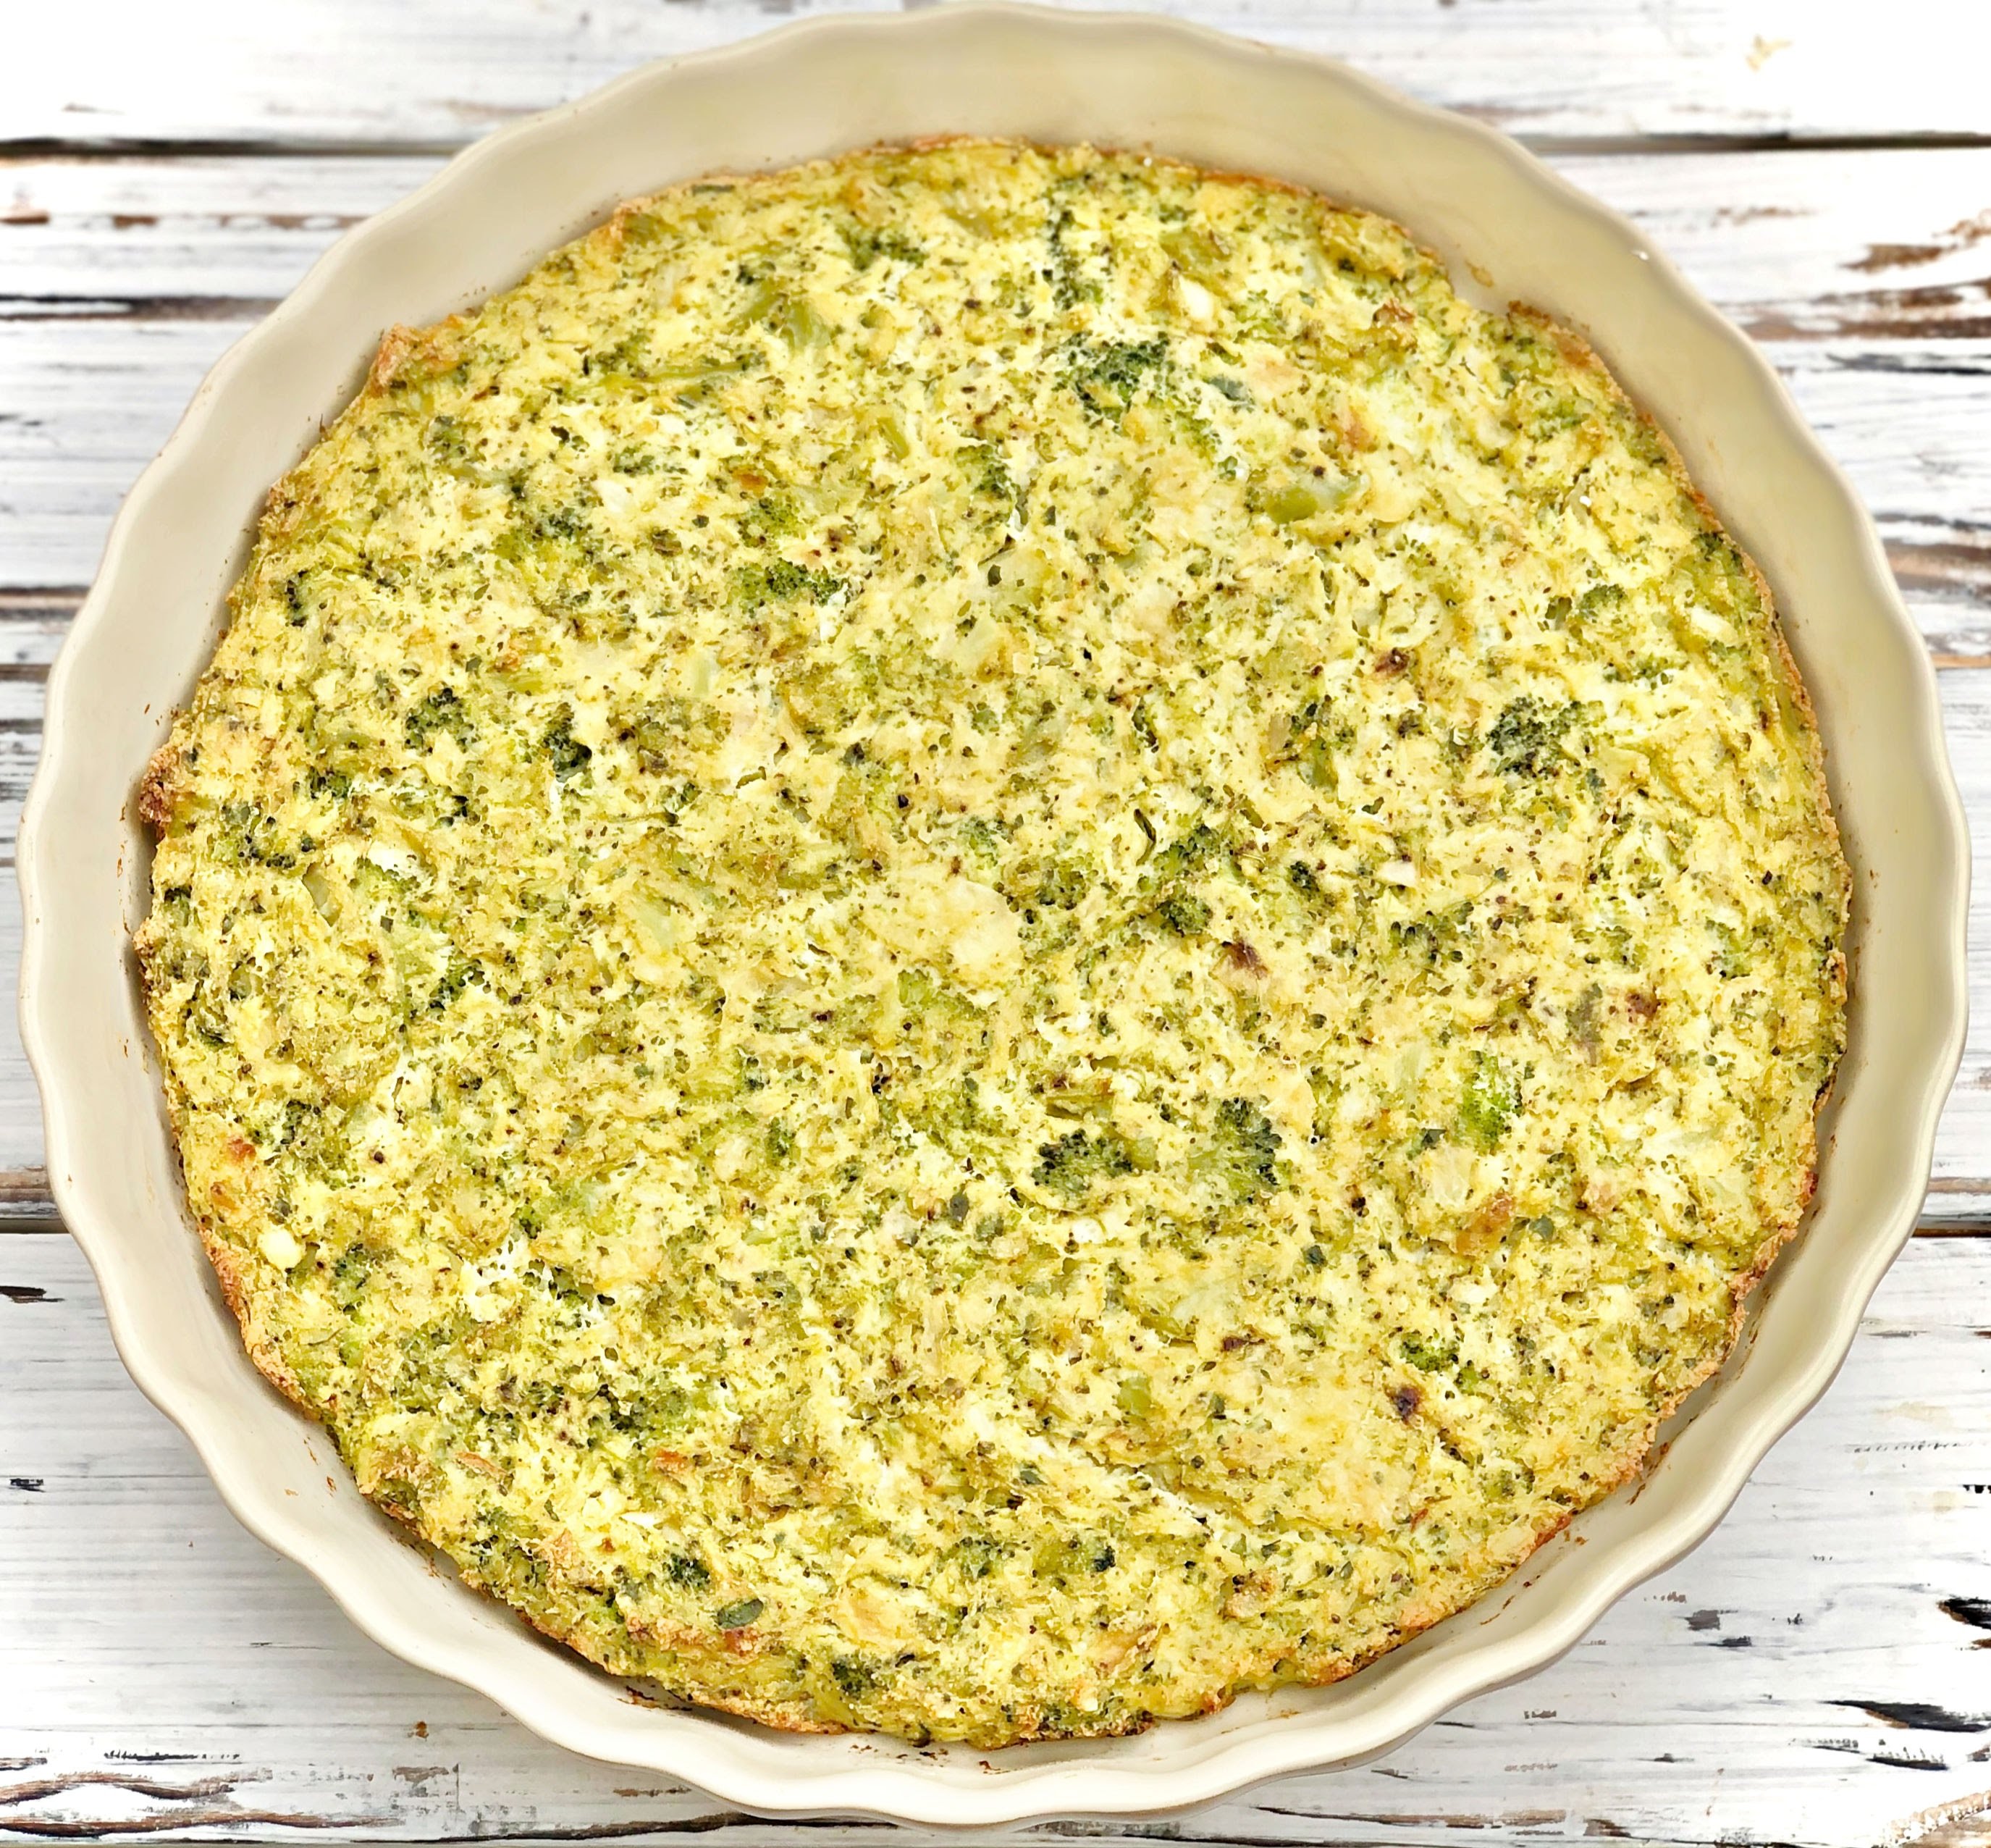 Tofu and Broccoli Frittata - A plant-based broccoli frittata recipe that is easy to make ahead and perfect for breakfast, brunch, lunch, or dinner. #veganfrittata #crustlessquiche #thiswifecooksrecipes #veganbreakfast  via @thiswifecooks